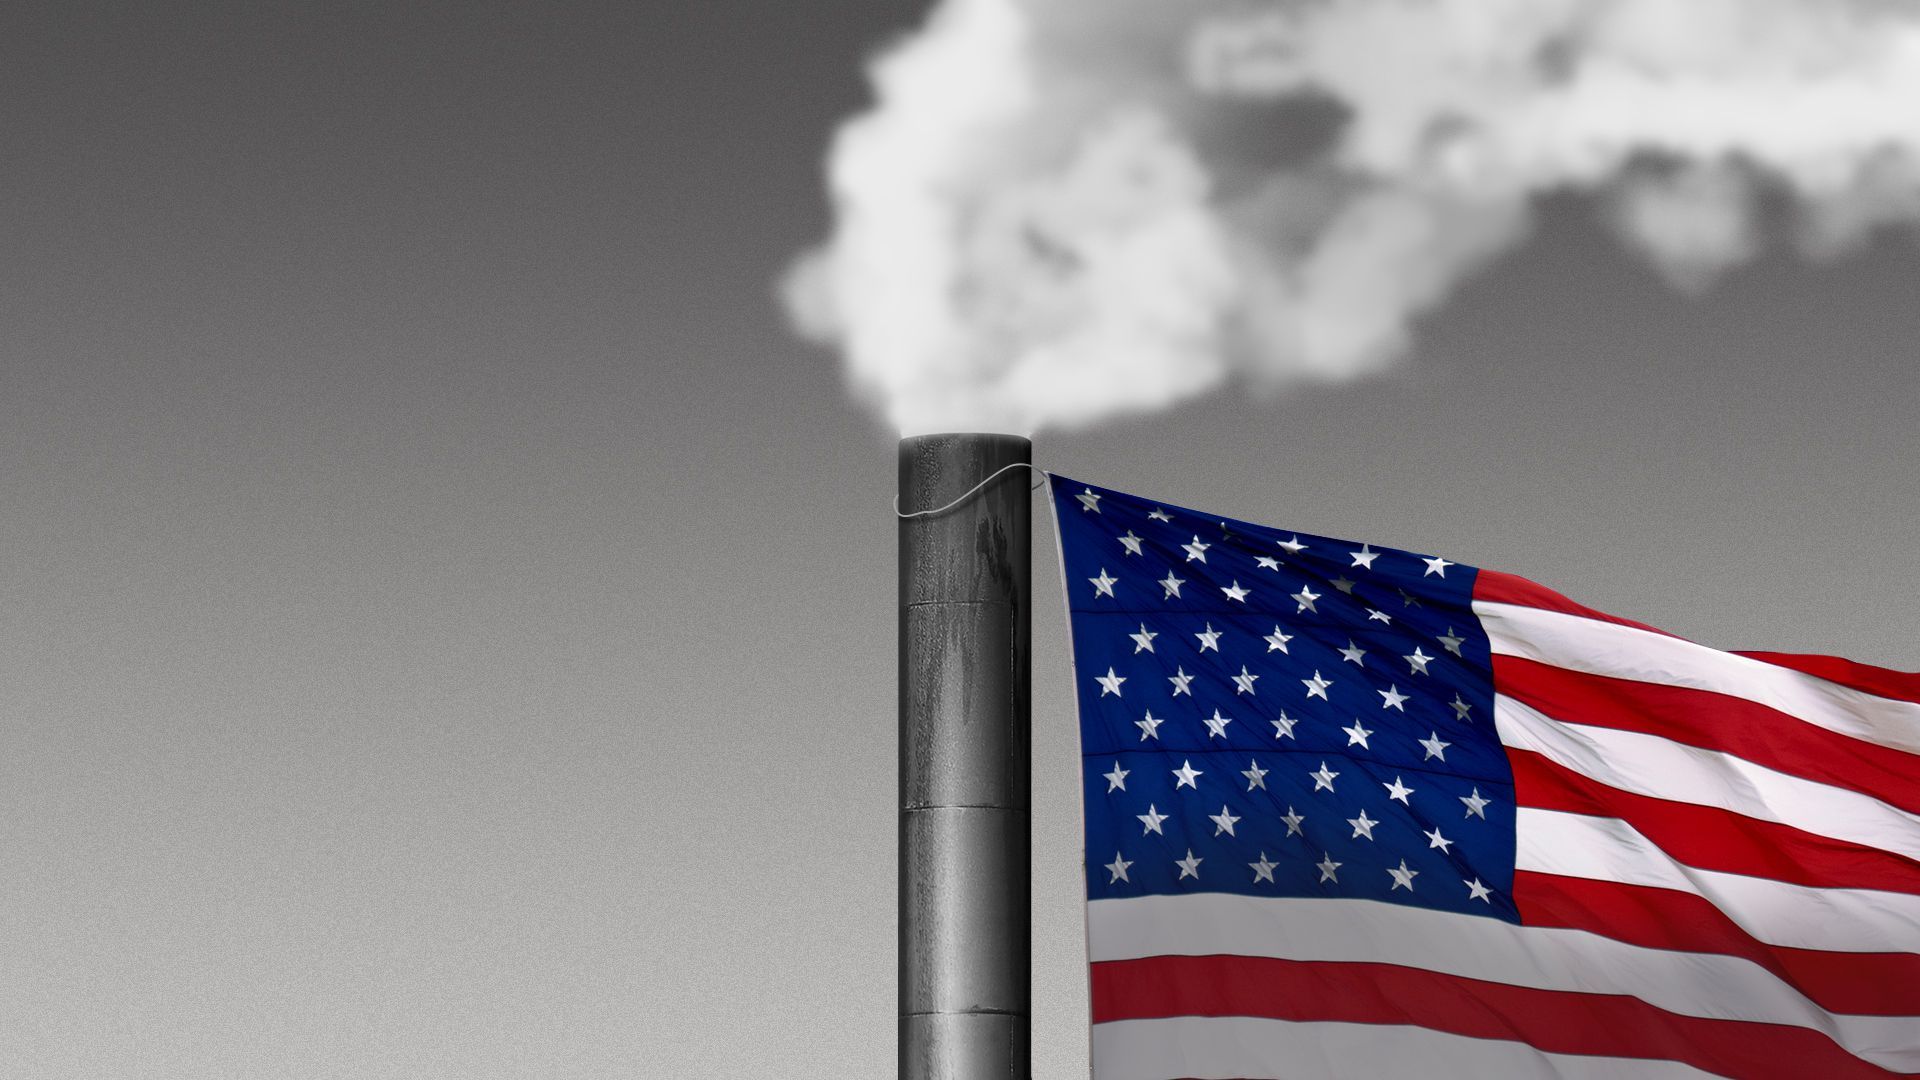 Illustration of a smokestack with an American flag on it